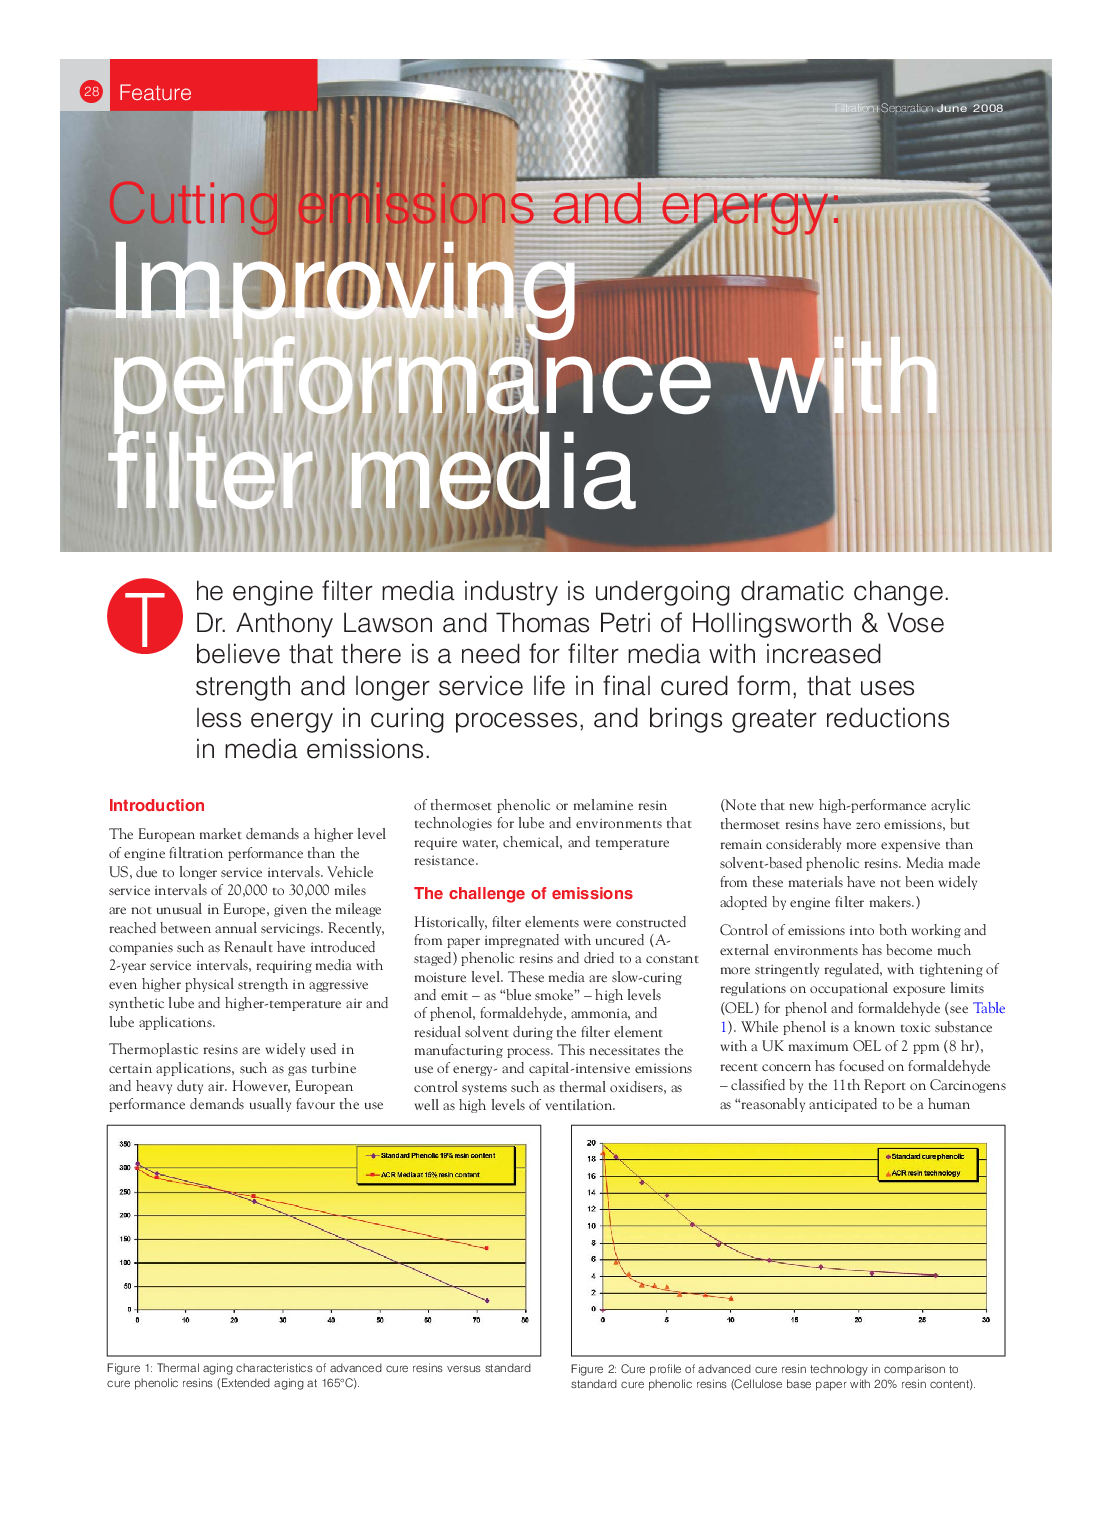 Cutting emissions and energy: Improving performance with filter media